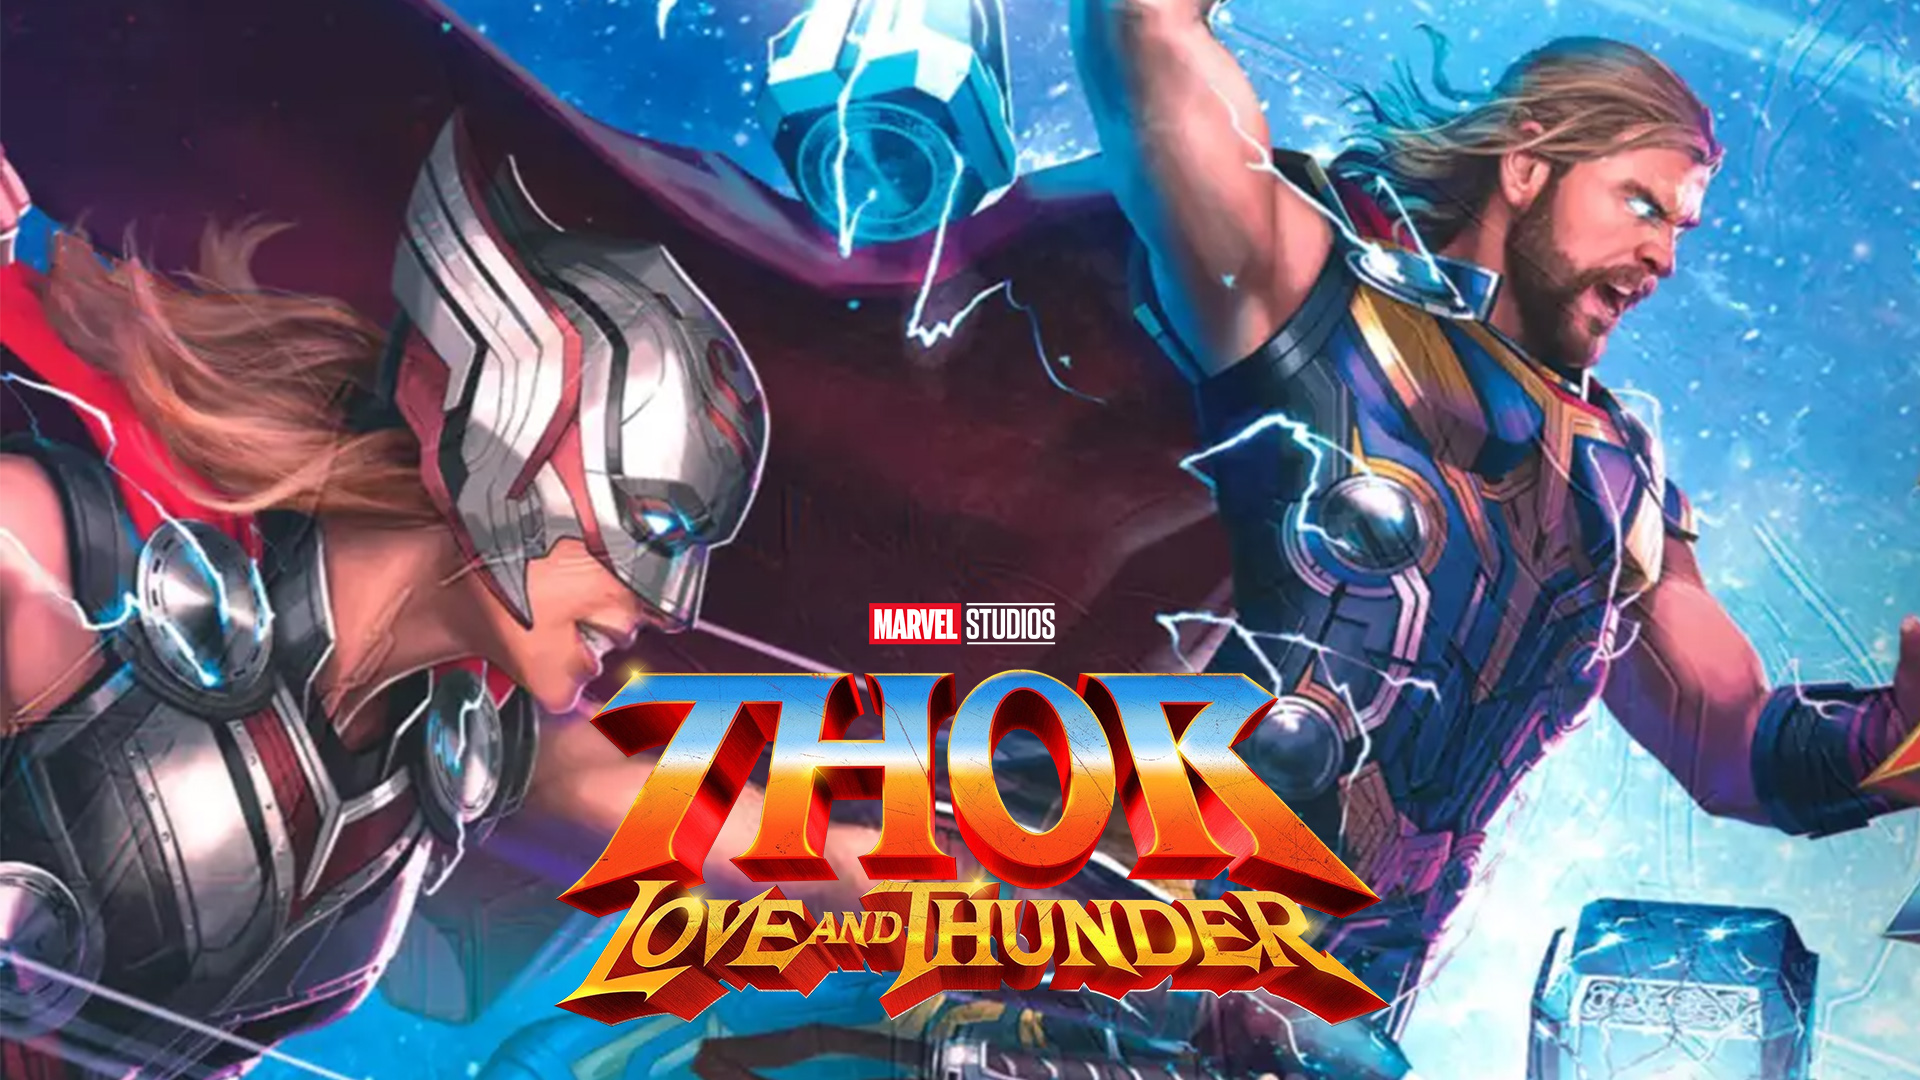 Thor: Love and Thunder first trailer delay is record breaking for Marvel Studios